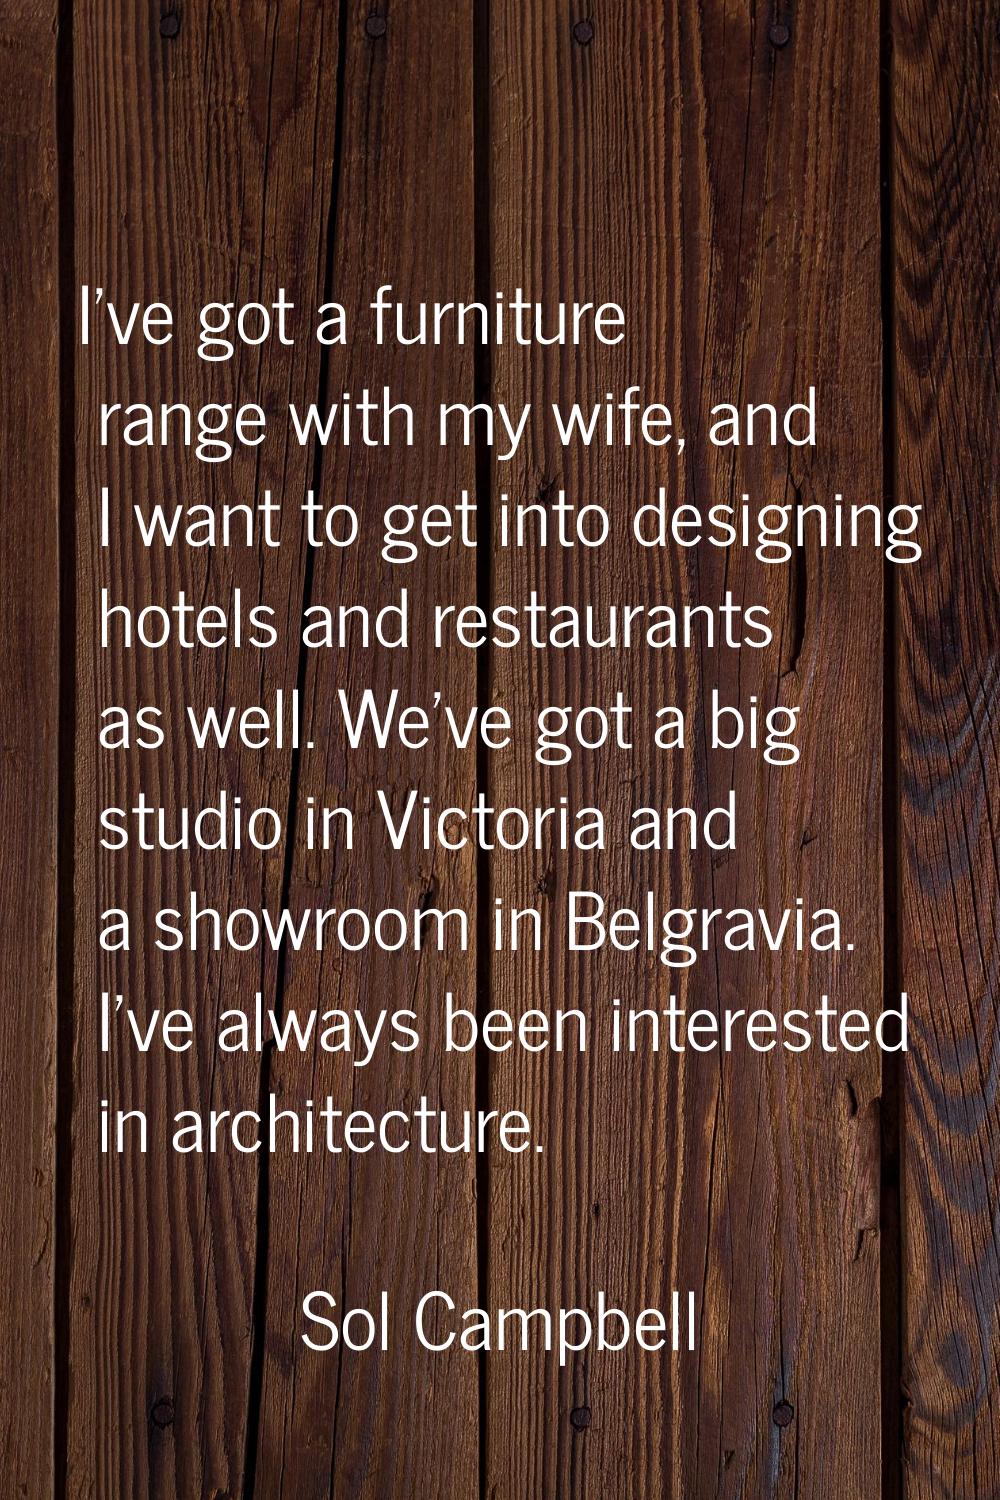 I've got a furniture range with my wife, and I want to get into designing hotels and restaurants as